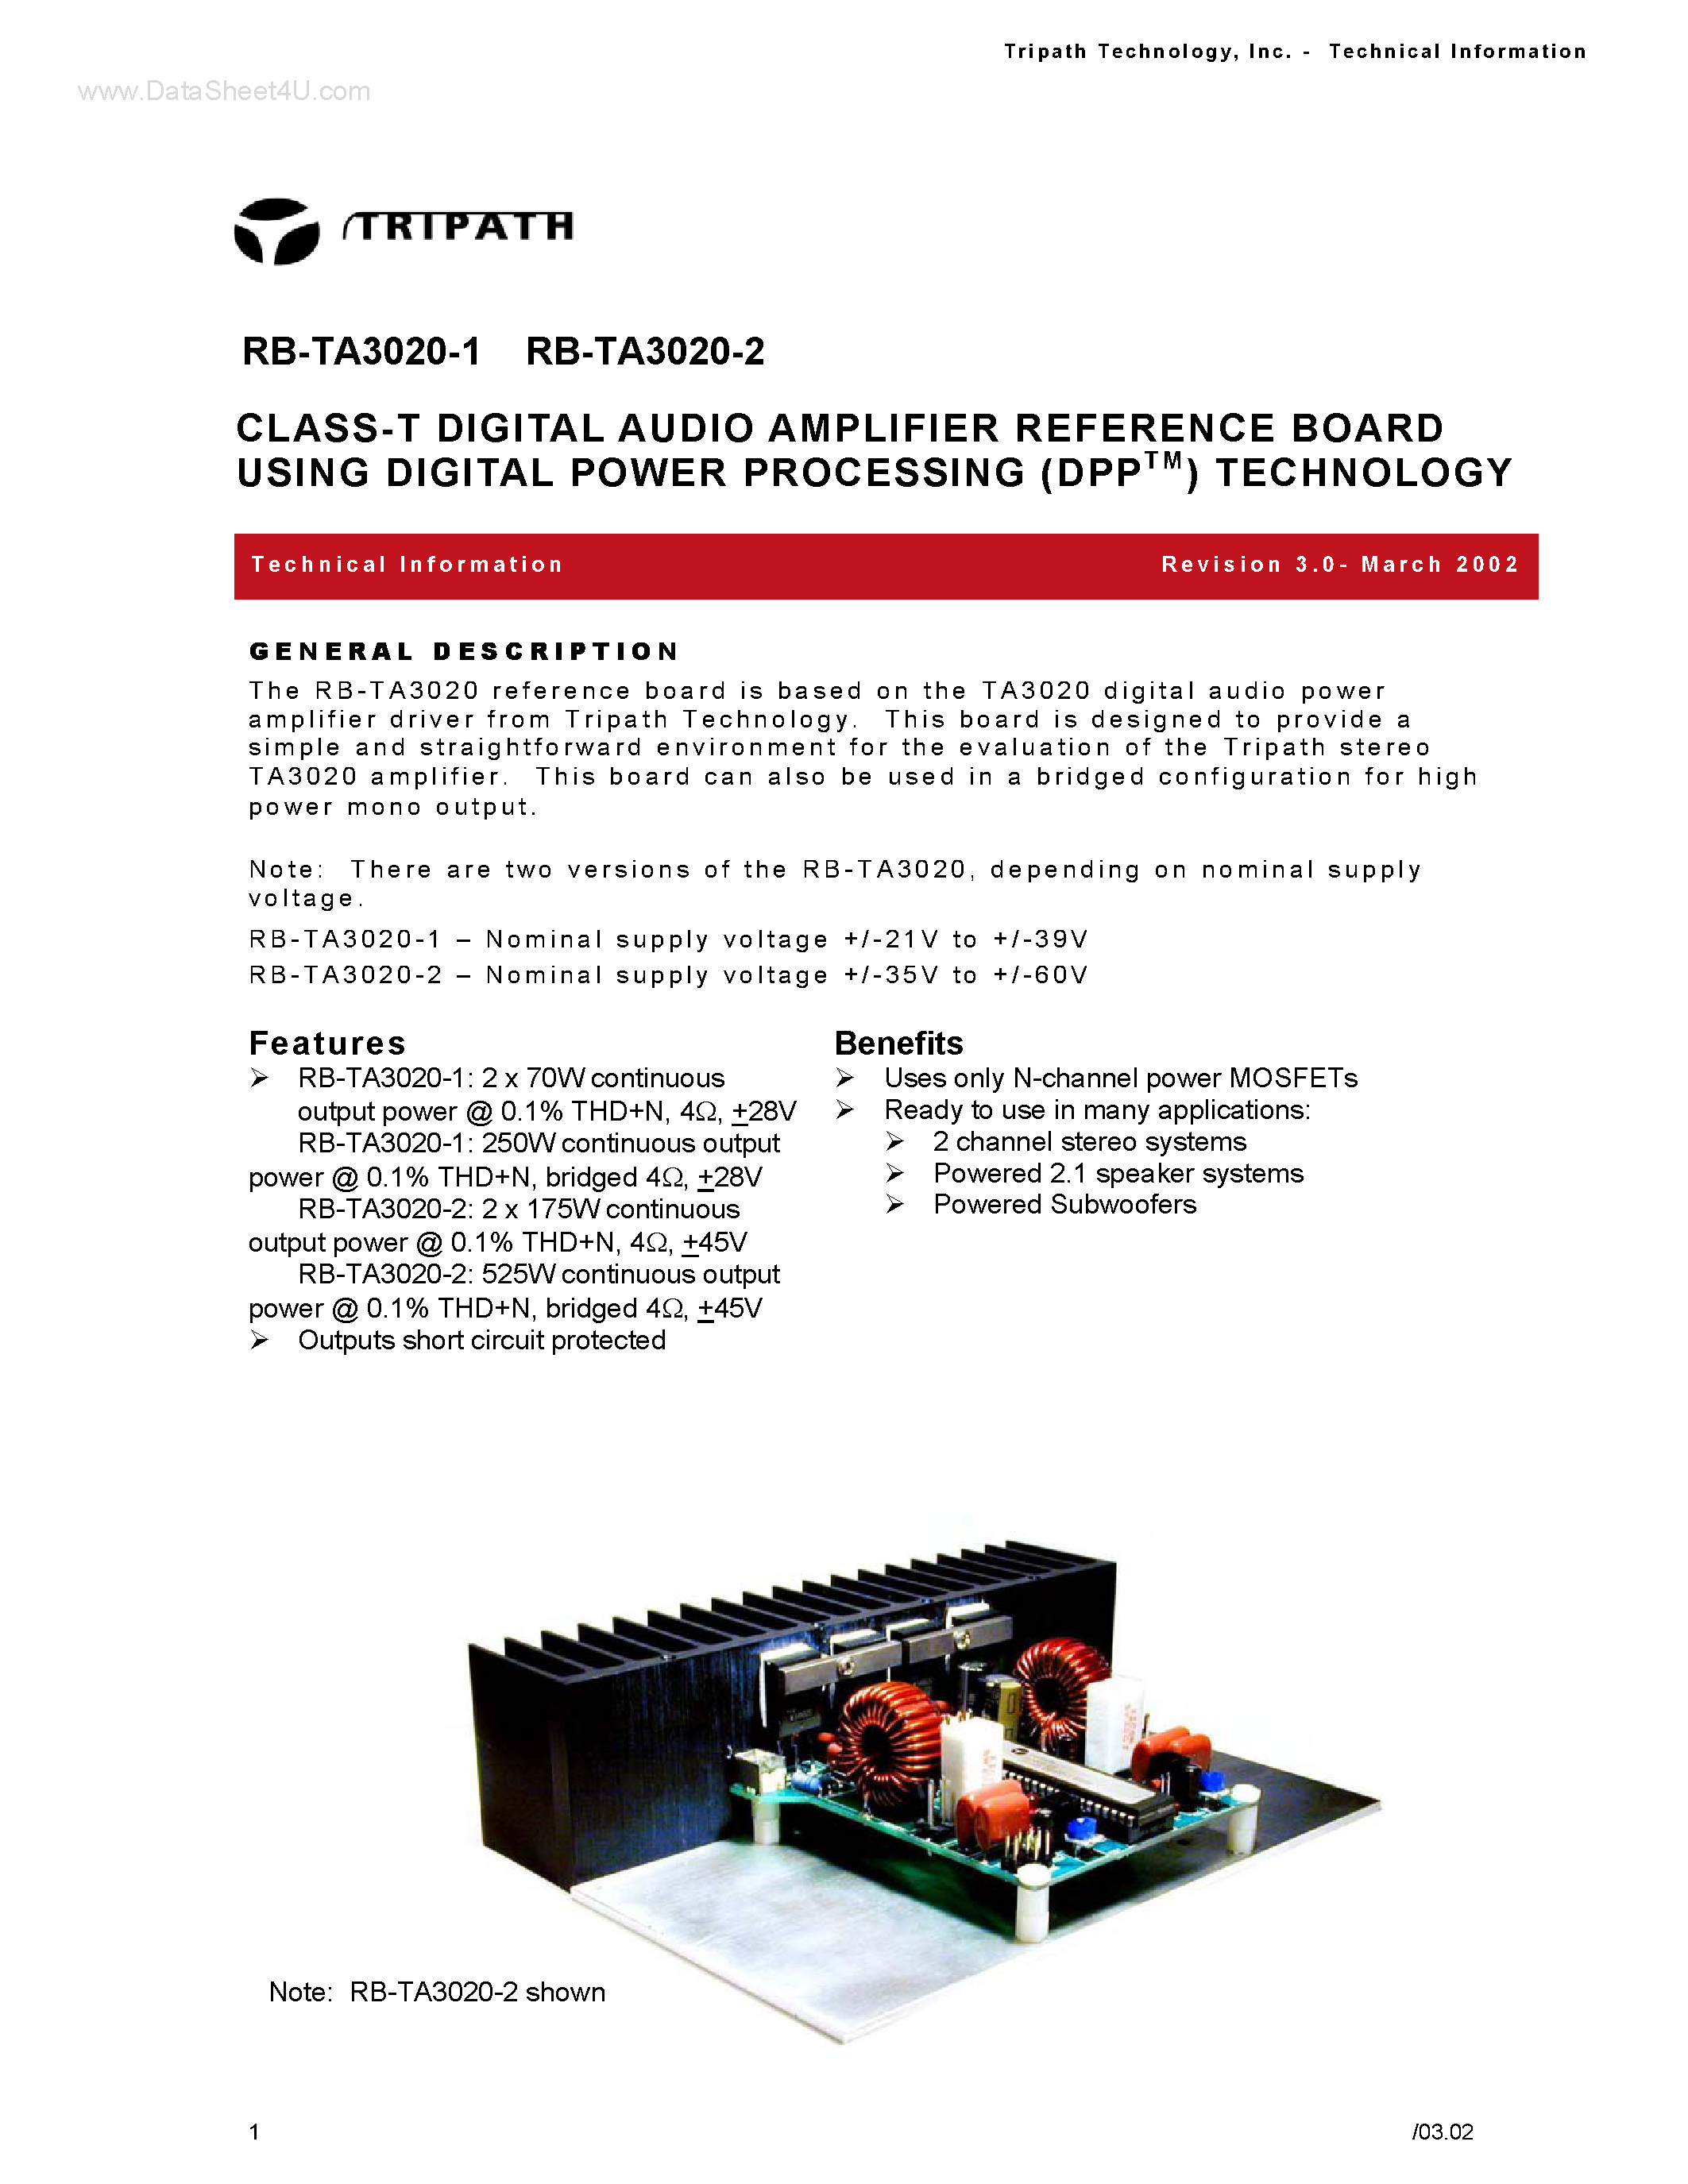 Даташит RB-TA3020-1 - (RB-TA3020-1/-2) CLASS-T DIGITAL AUDIO AMPLIFIER REFERENCE BOARD страница 1